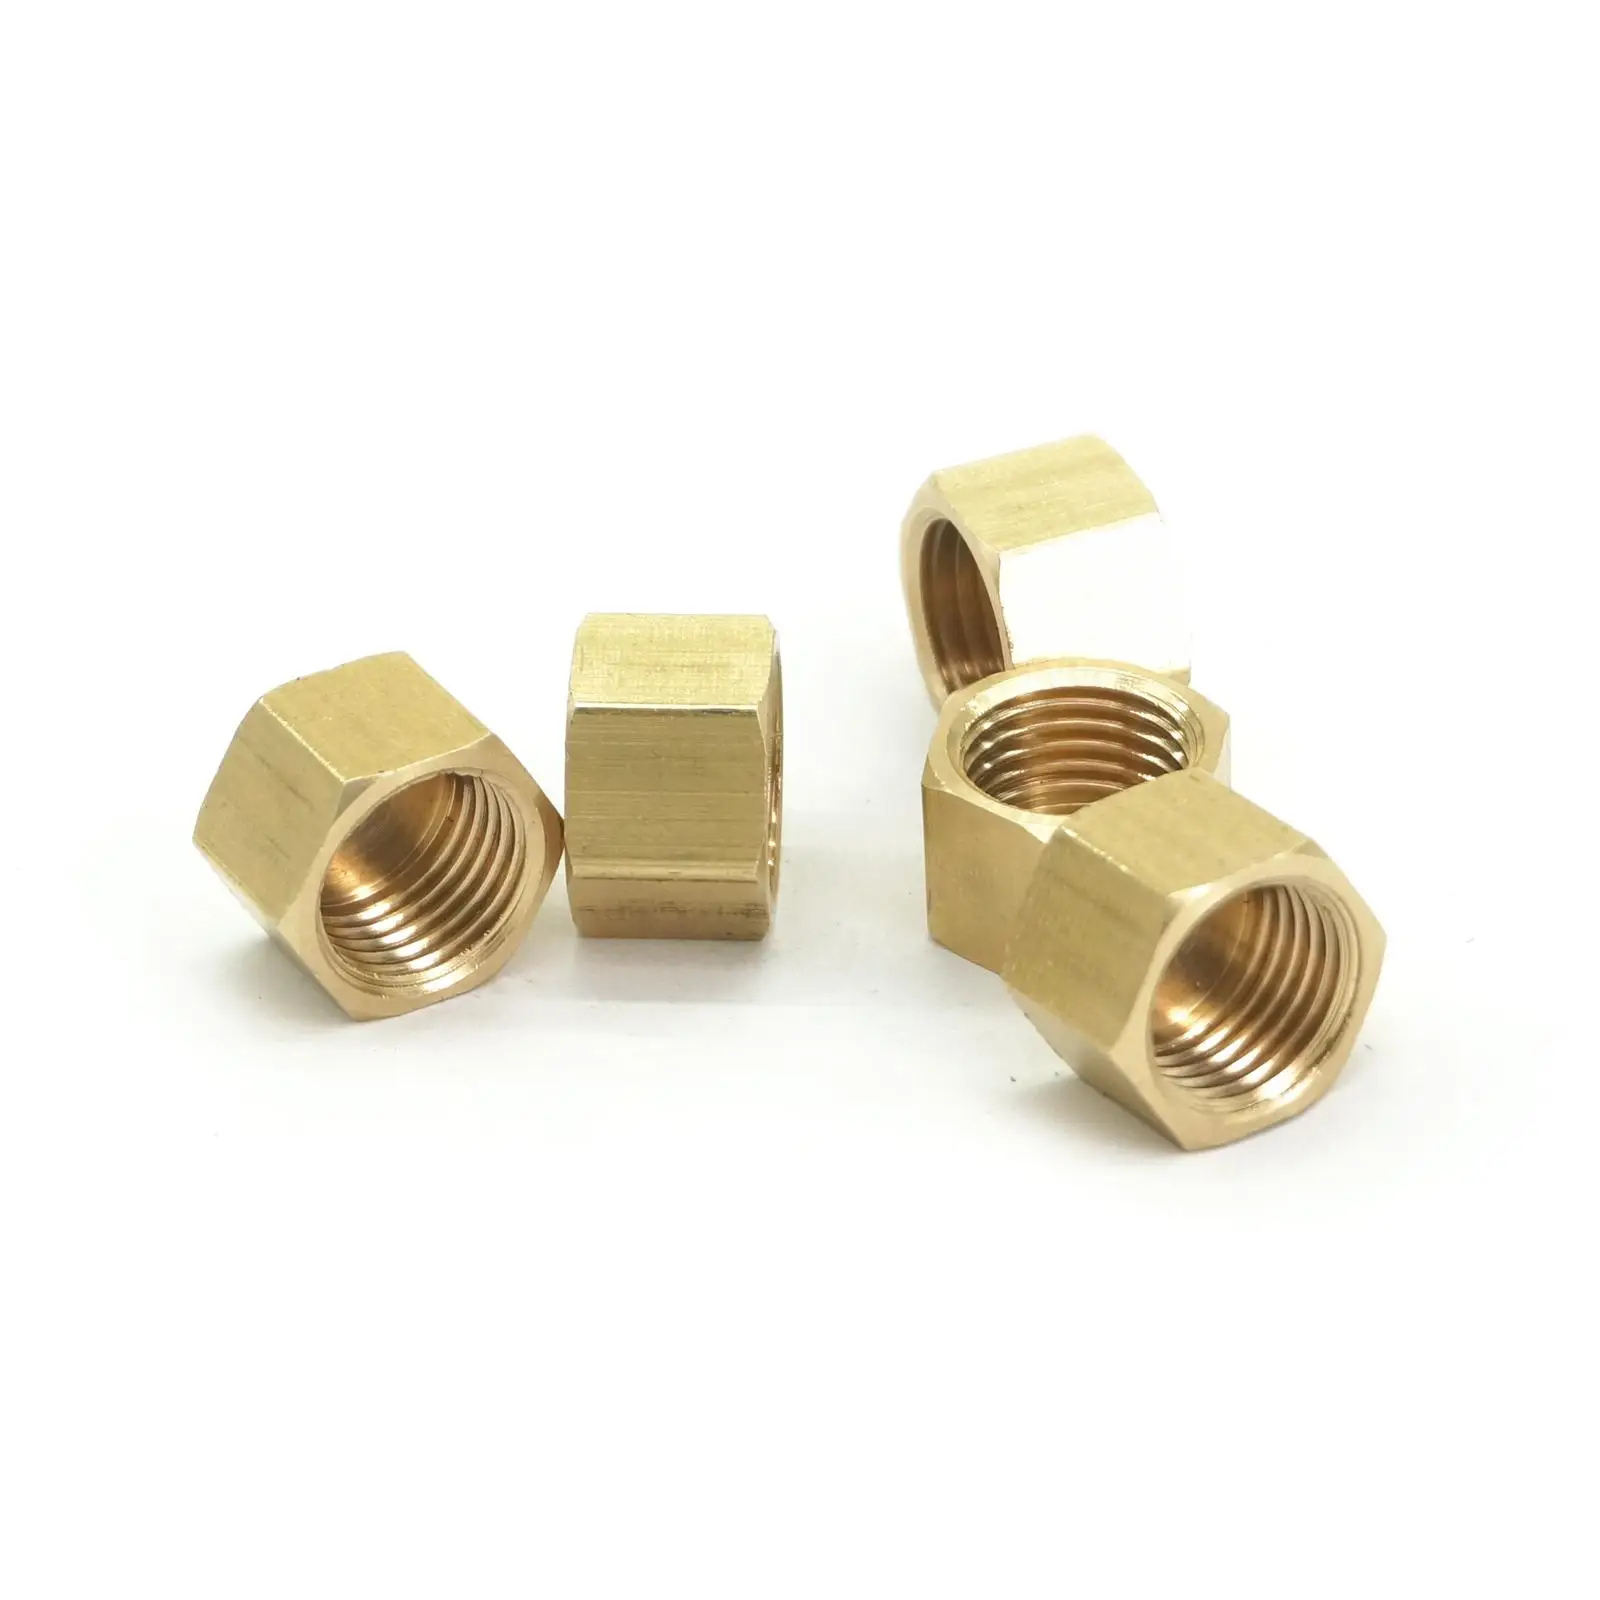 Brass Hexagon 3/8" BSP Female Nut and 3/8" Hose Tail Fitting 